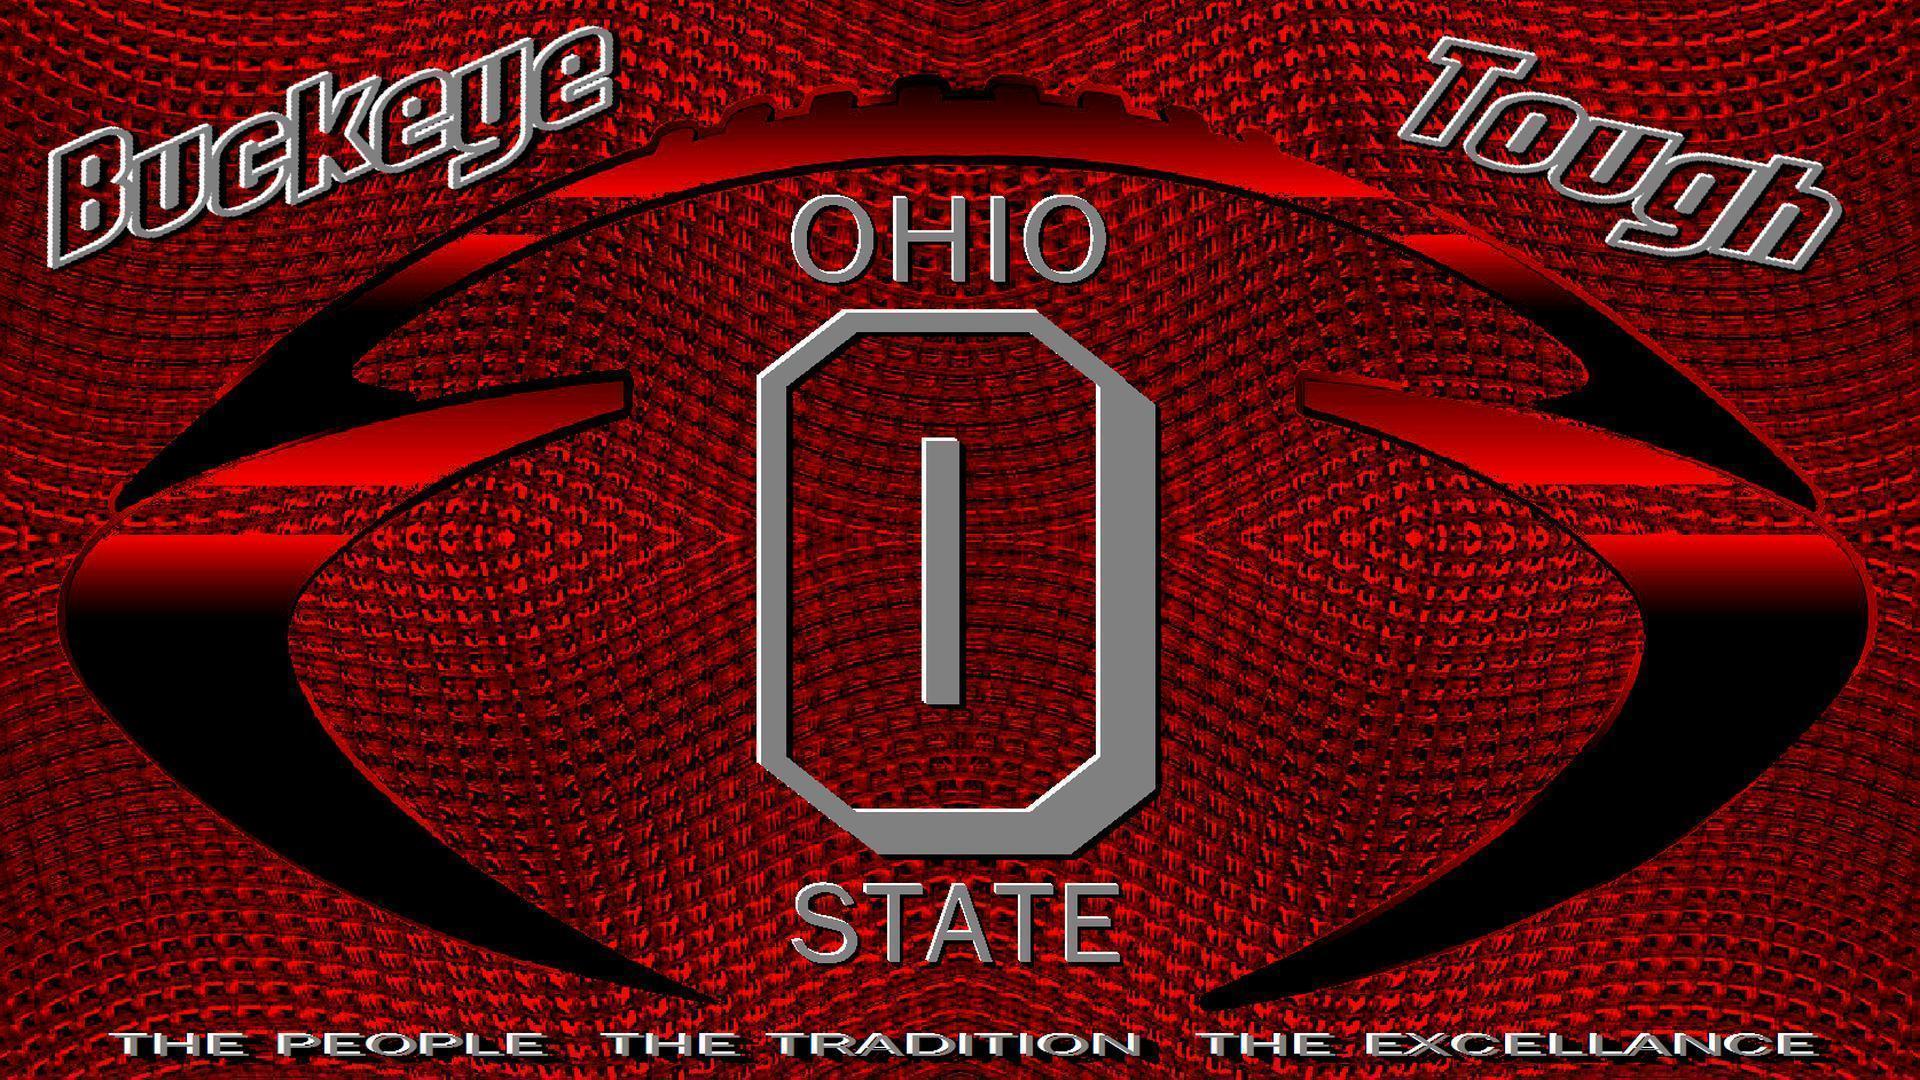 Ohio State Wallpaper 25096 Wallpaper HD. Hdpictureimages